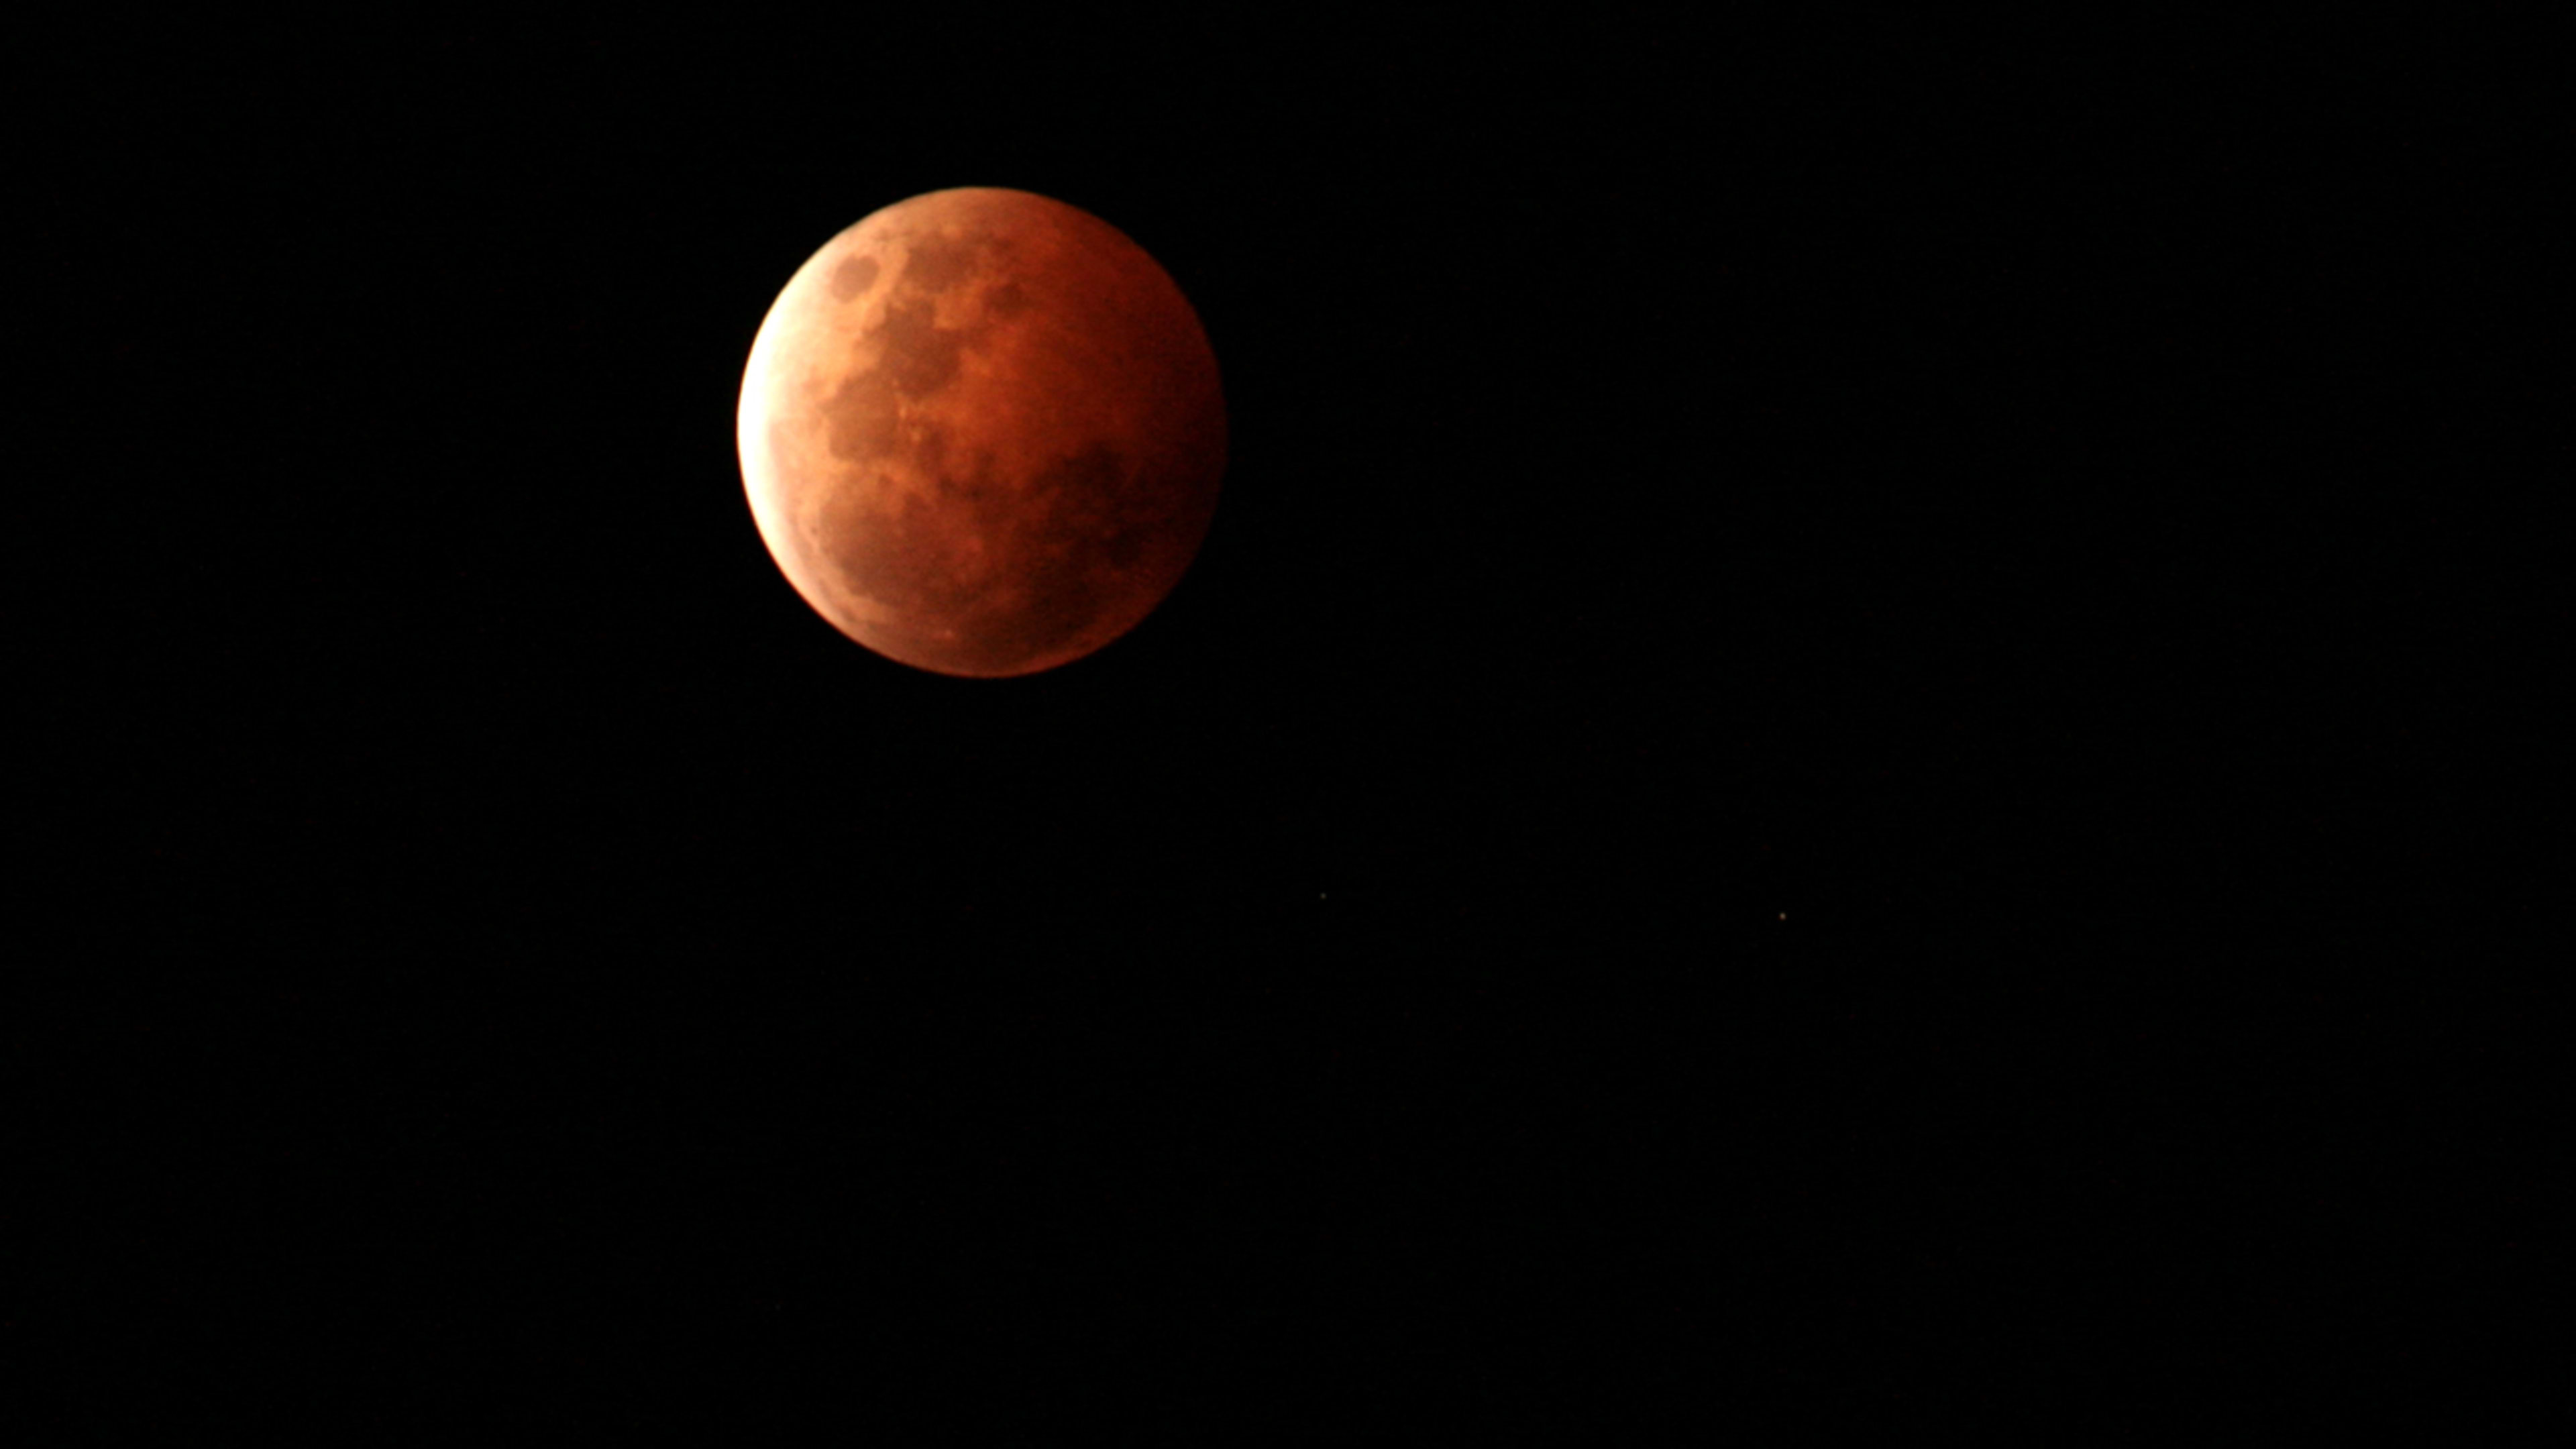 Lunar eclipse live stream: How to watch the July 2018 “blood moon” online